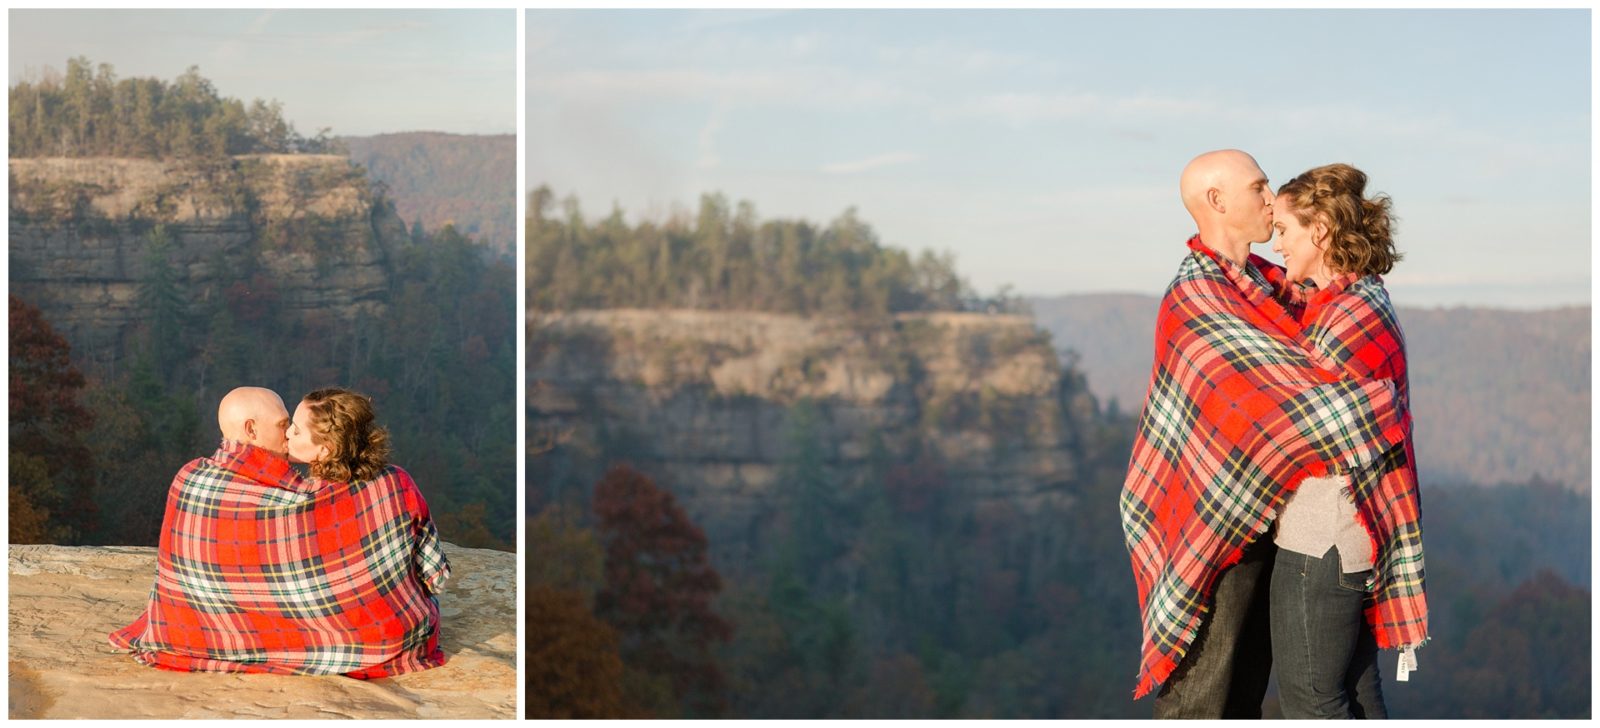 Fall Red River Gorge engagement session at Natural Bridge State Park in Slade, Kentucky. Featuring hiking trails, rock formations, overlooks, and an arch. Photo by: Kevin and Anna Photography www.kevinandannaweddings.com